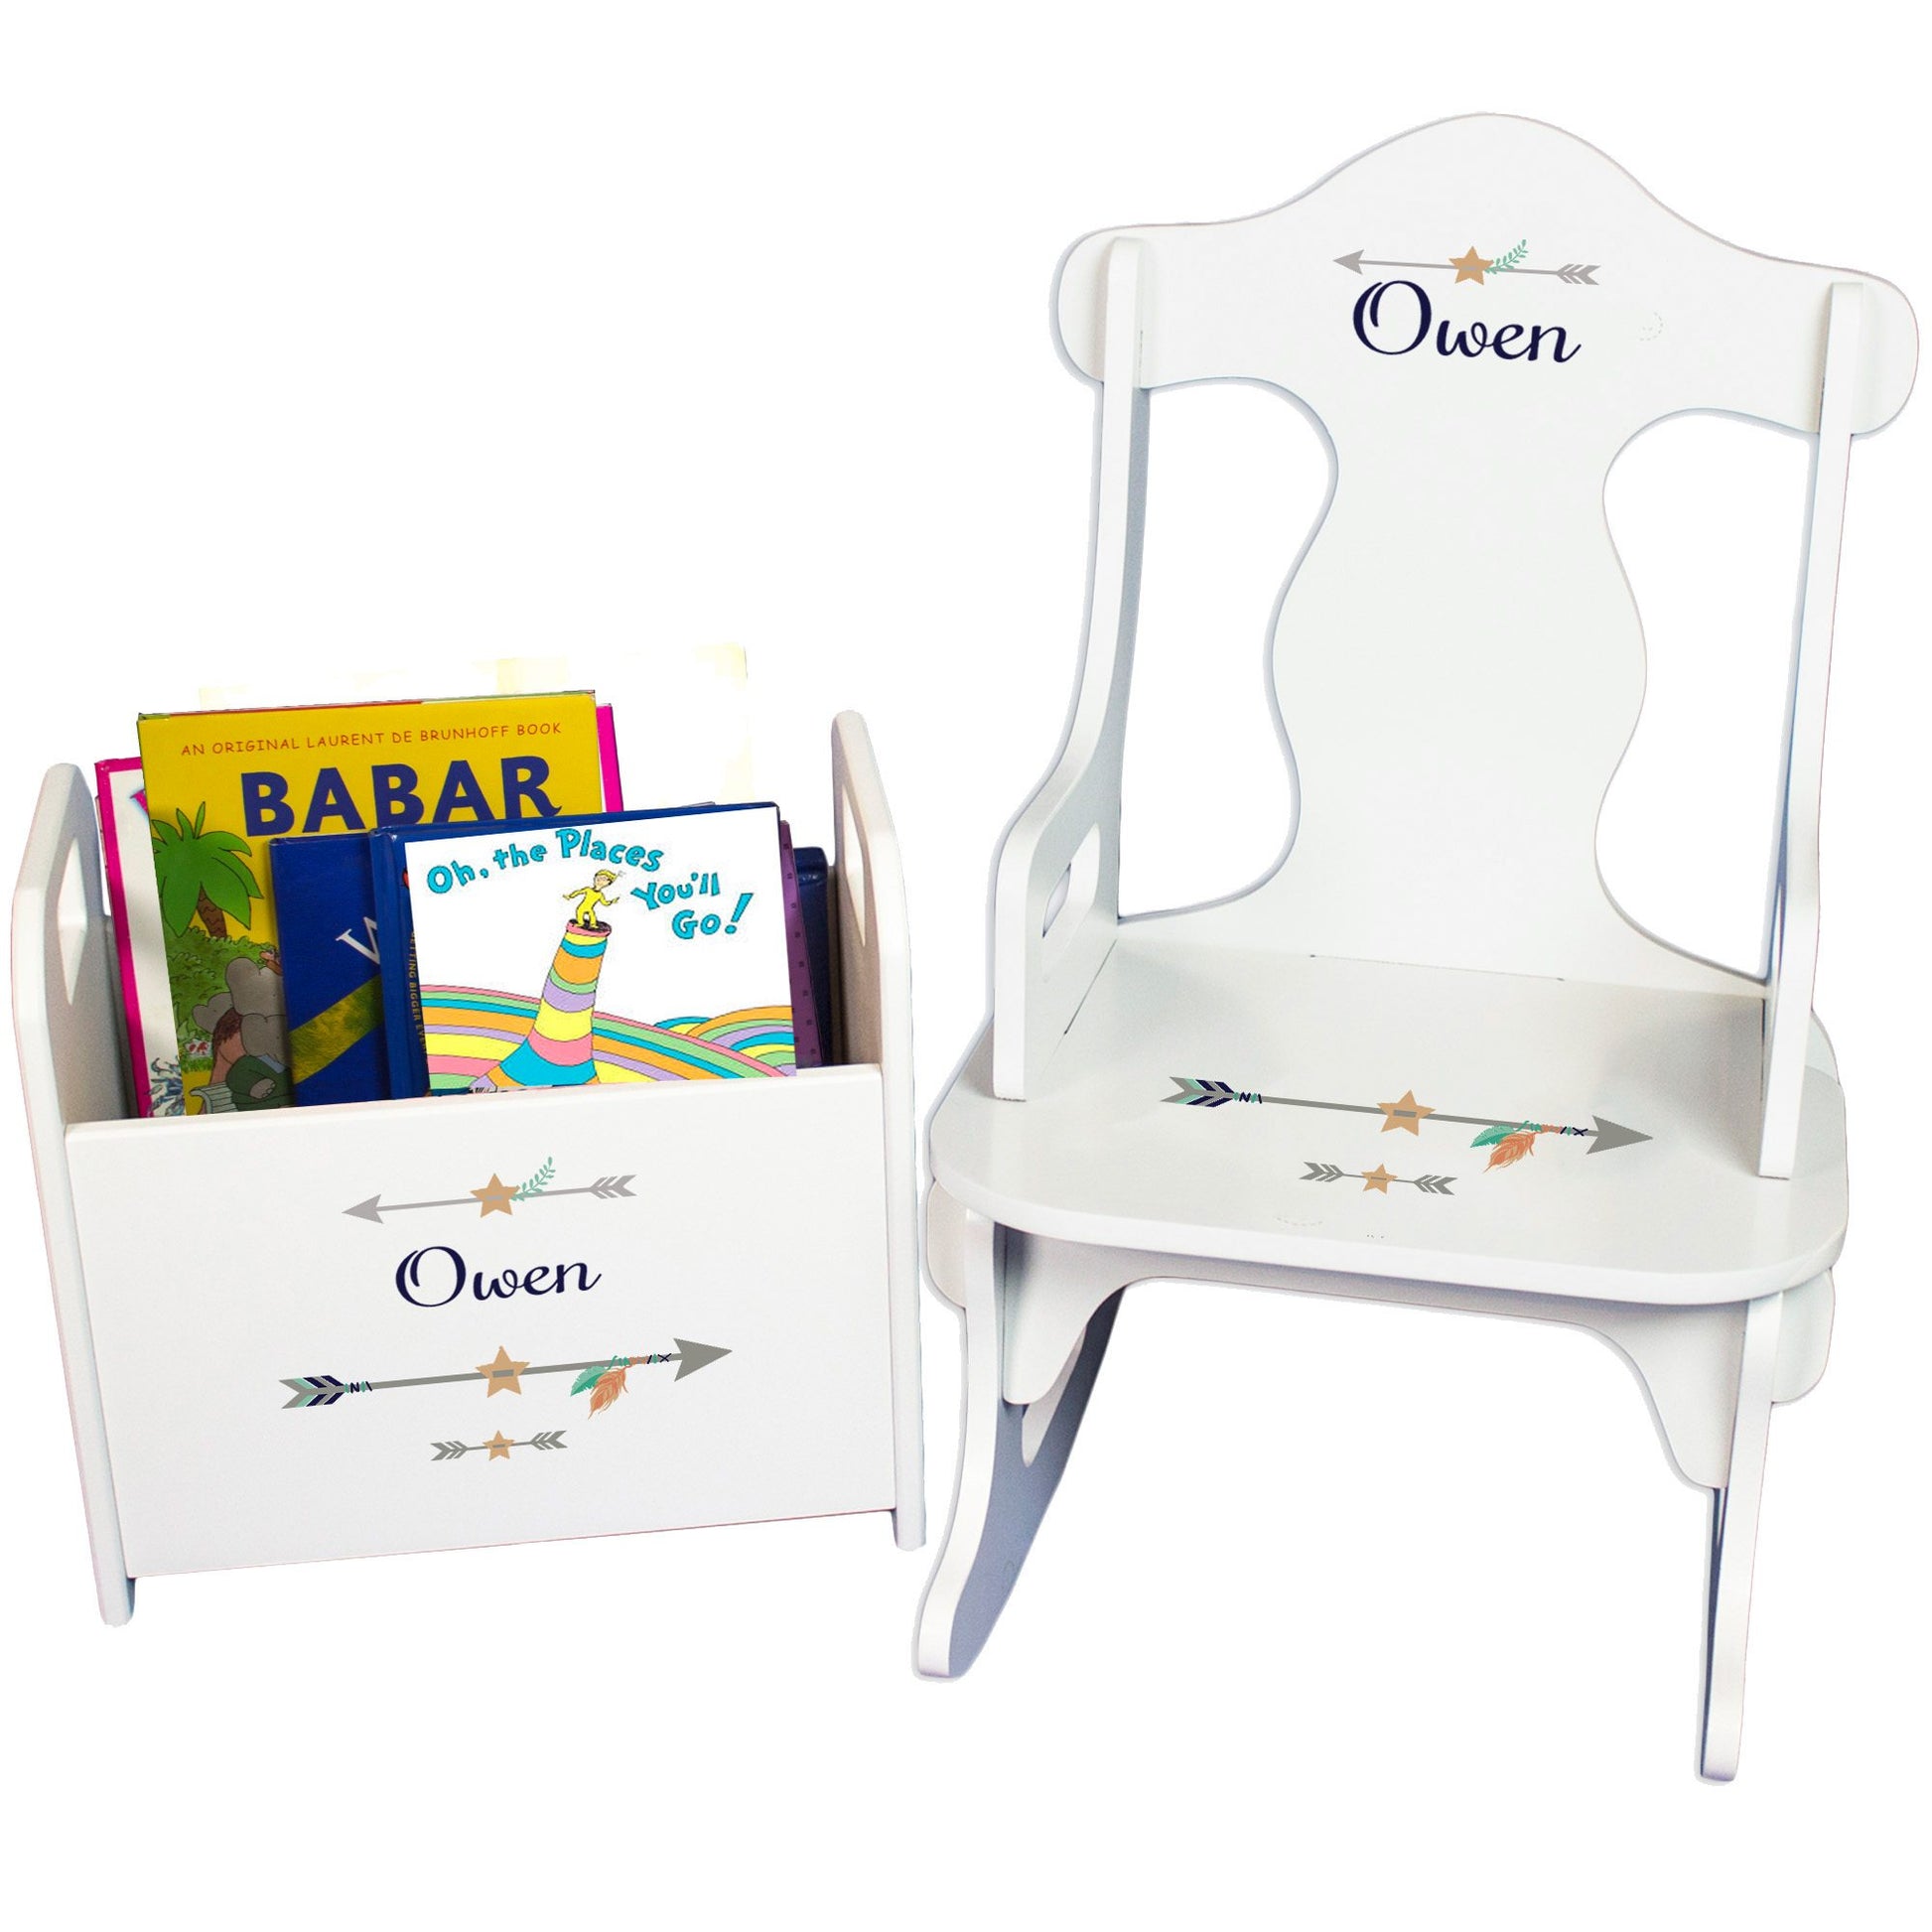 Personalized Tribal Arrows Boy Book Caddy And Puzzle Rocker baby gift set